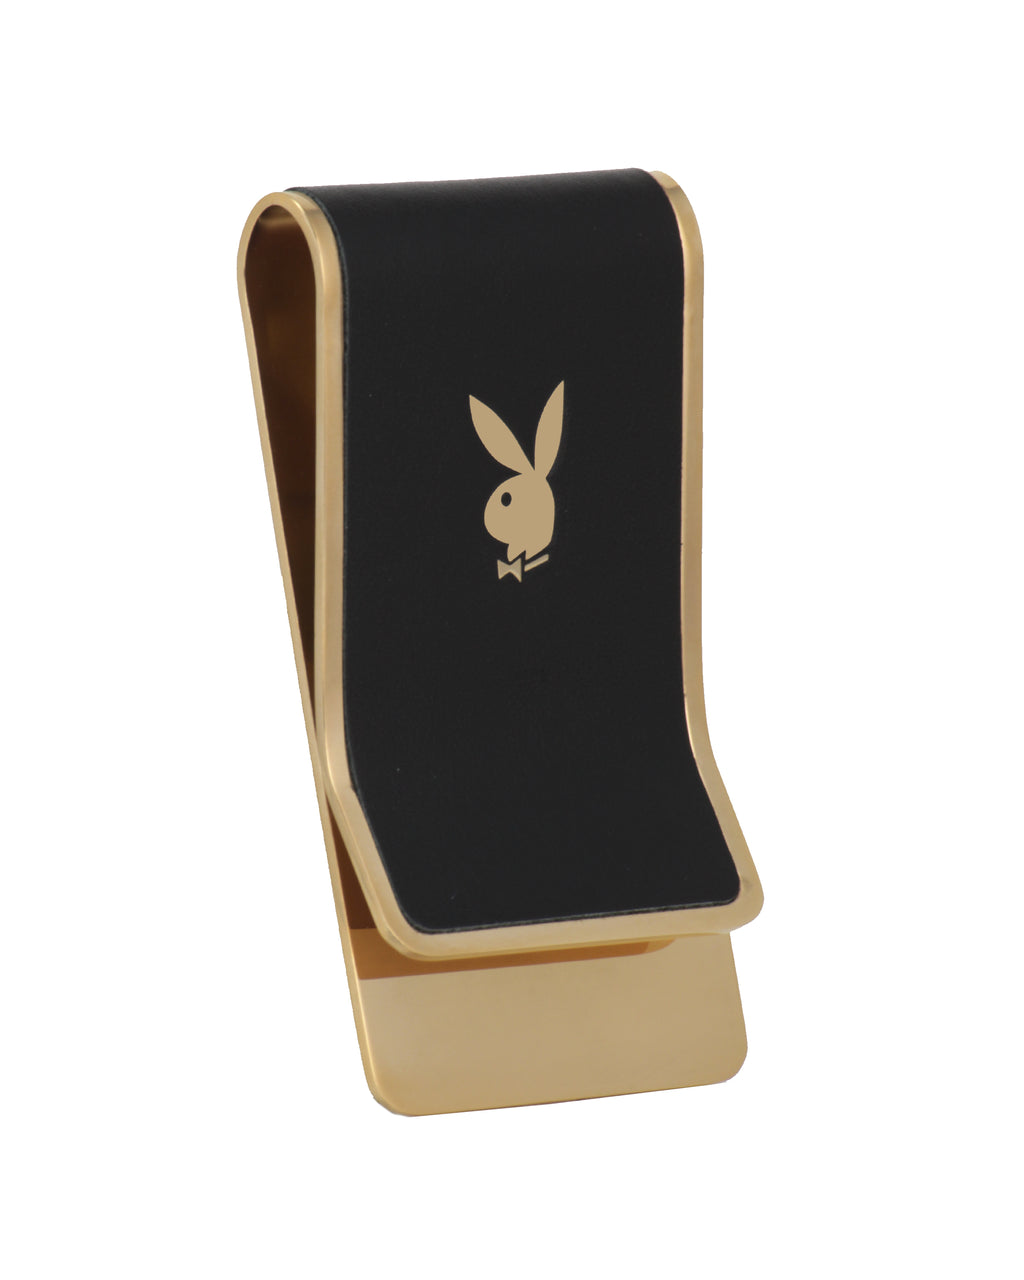 Playboy Leather and Stainless Steel Money Clip